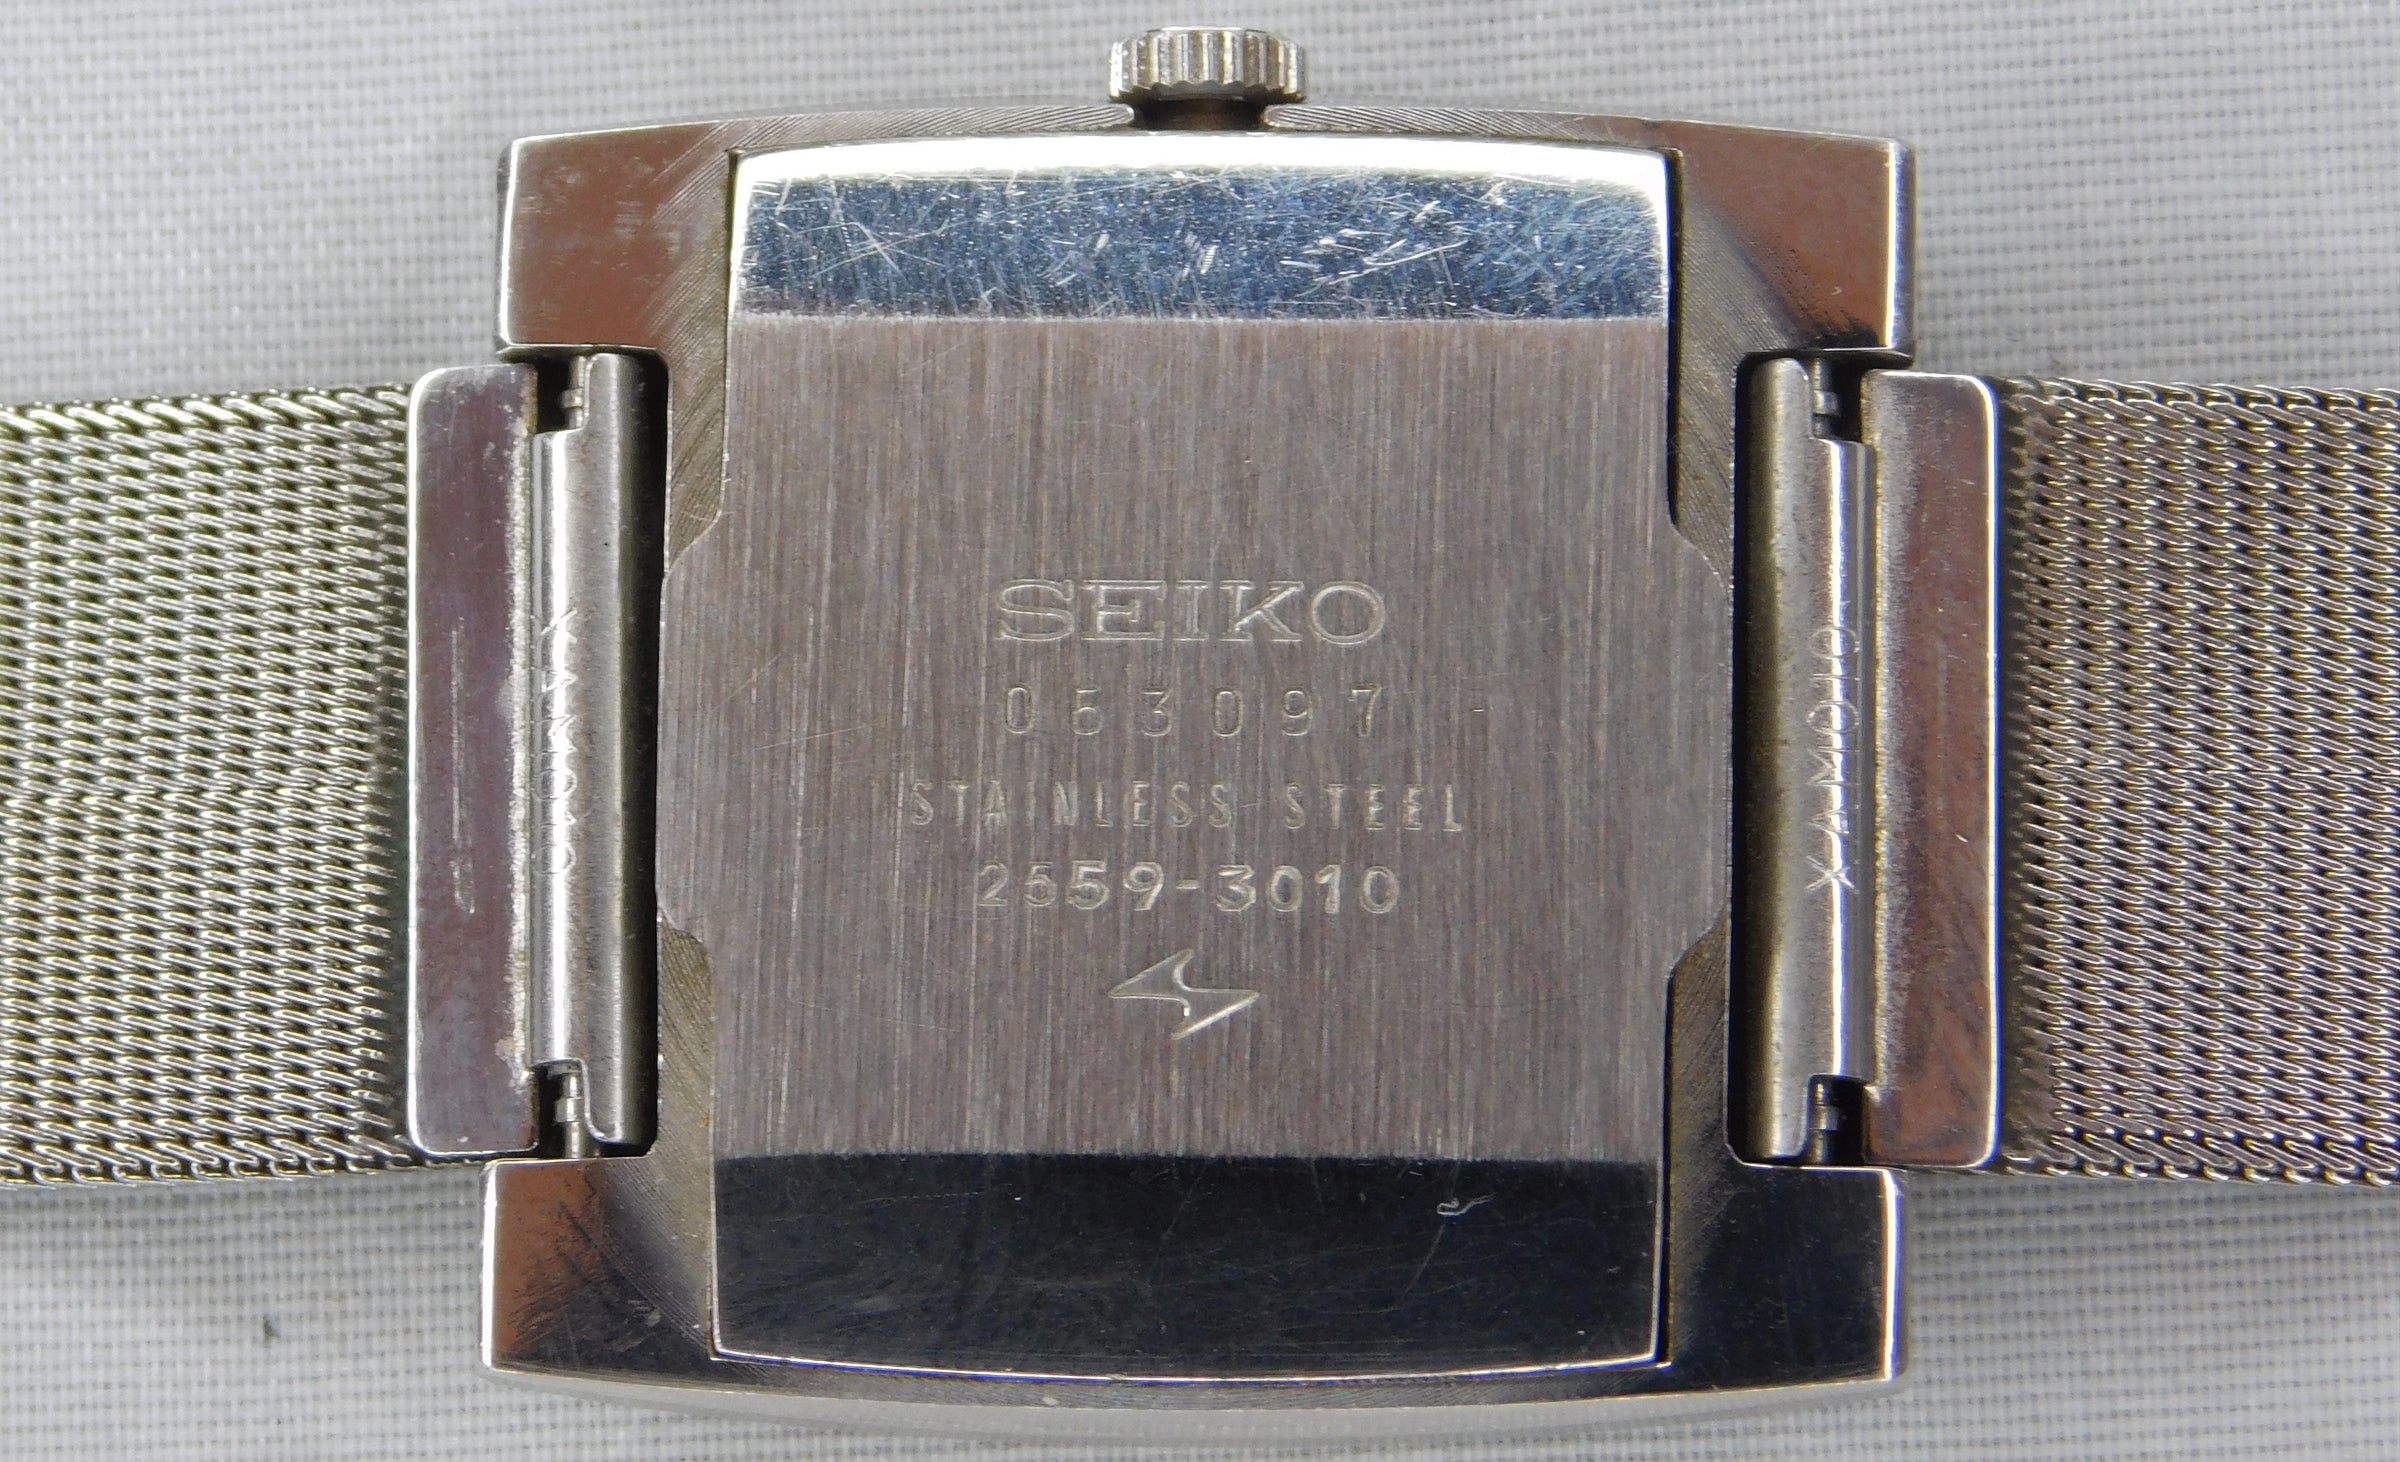 Seiko 2559-3010 Rare Vintage 1970 Stainless Steel Manual Wind Mens Wat –  Vincent Palazzolo